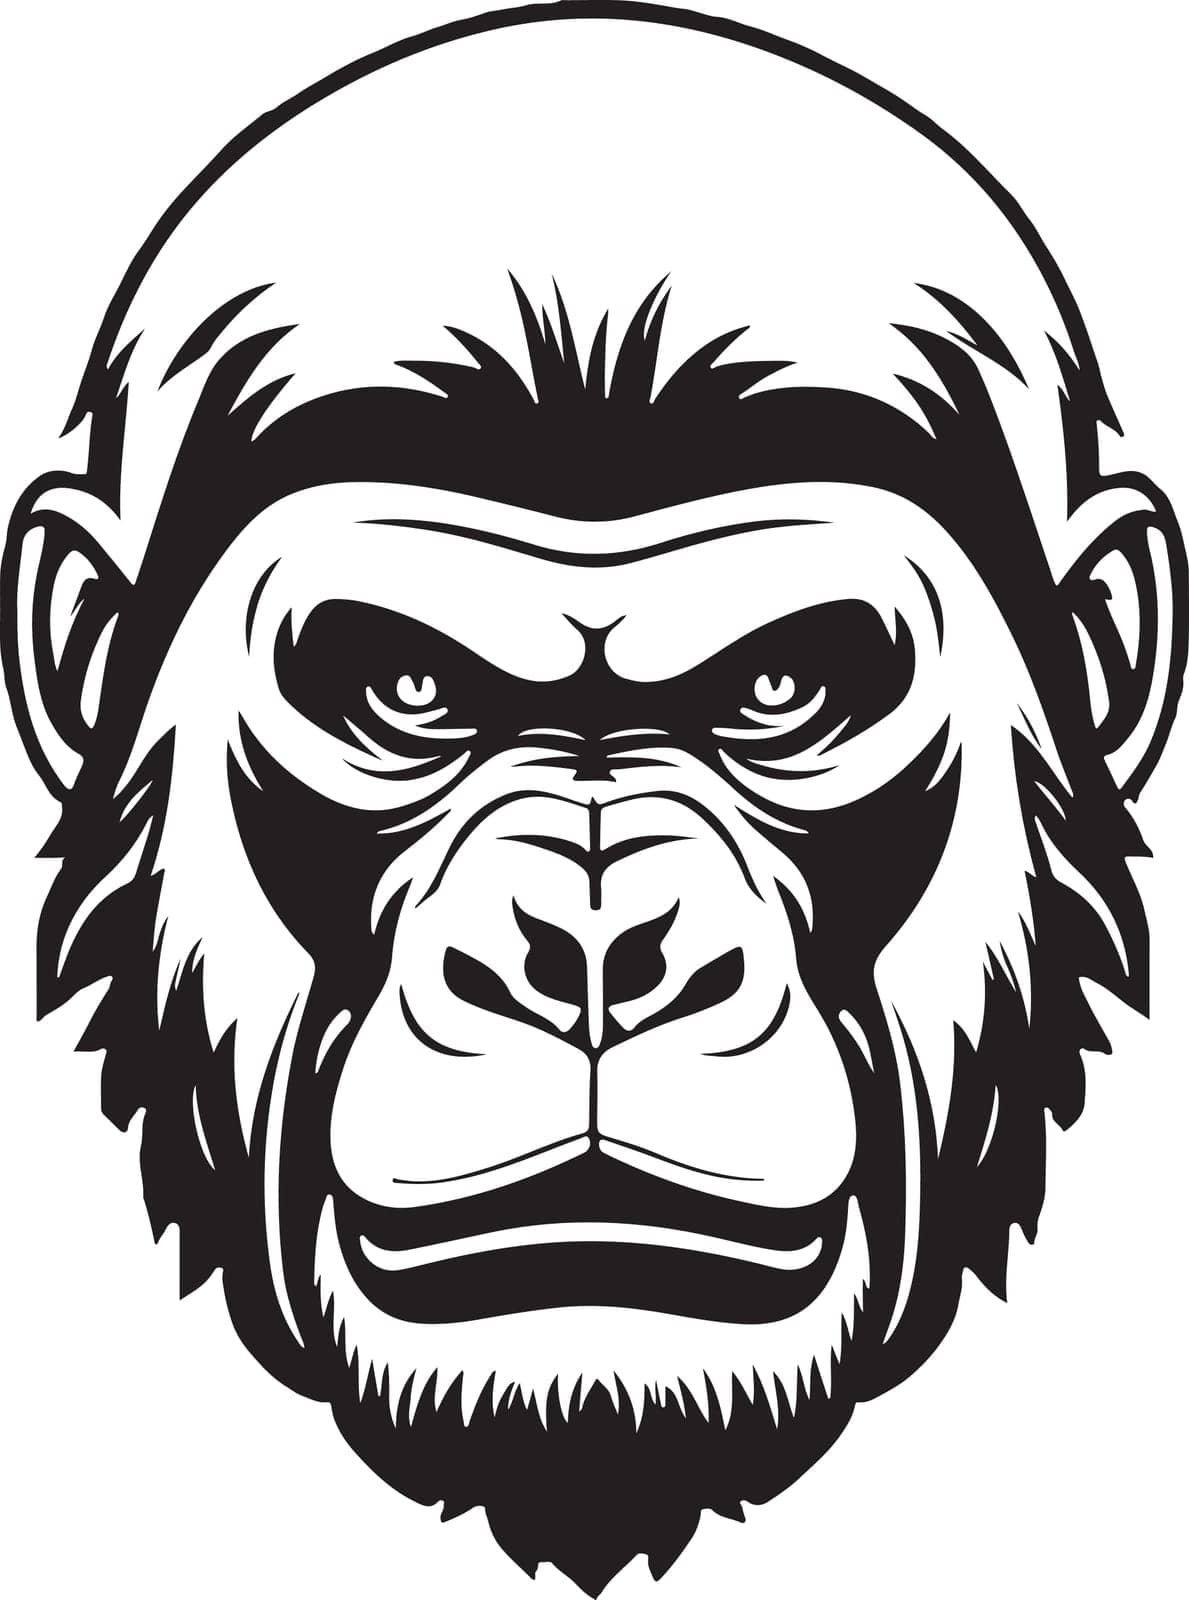 Pretty and powerful gorilla emblem art vector by luisalfonso89